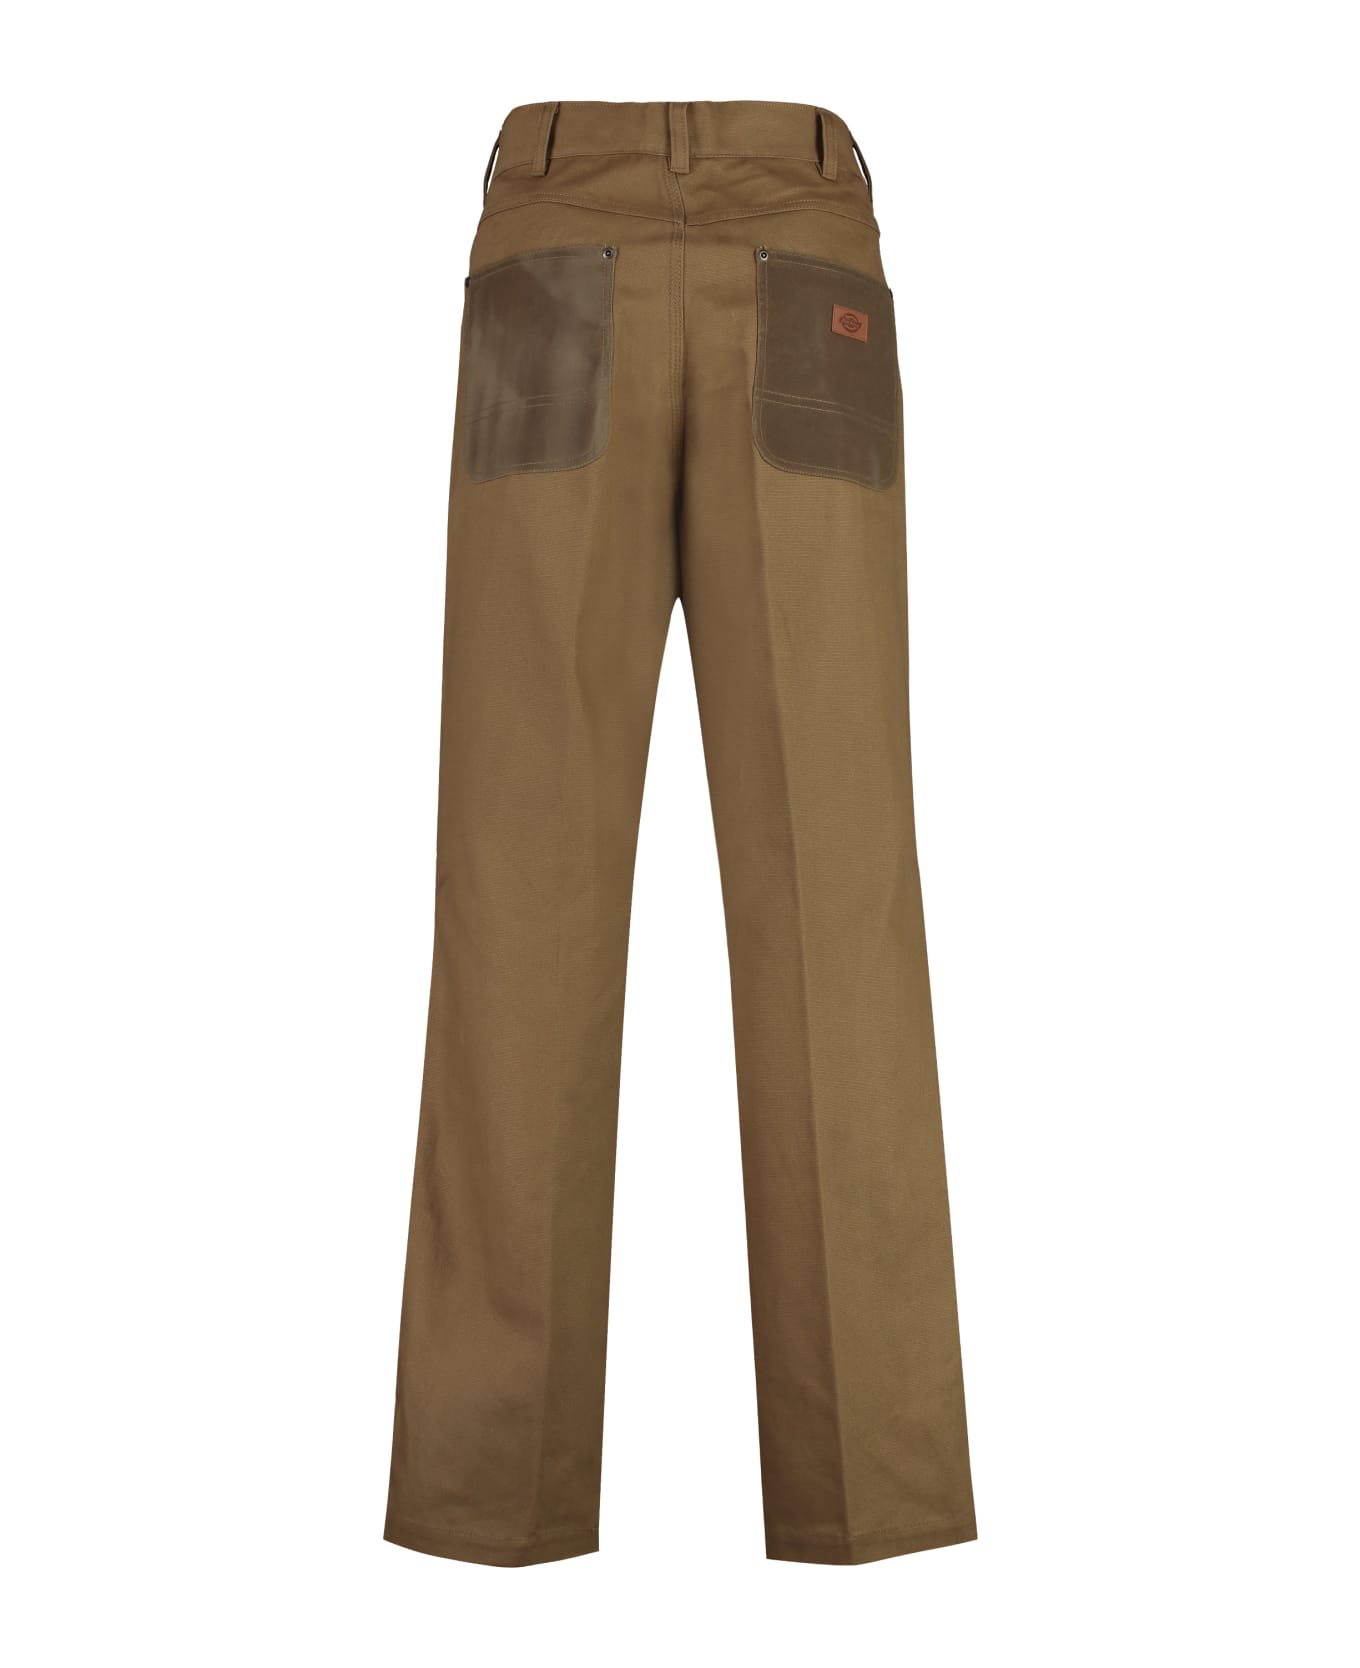 Dickies Lucas Cotton Trousers - brown ボトムス